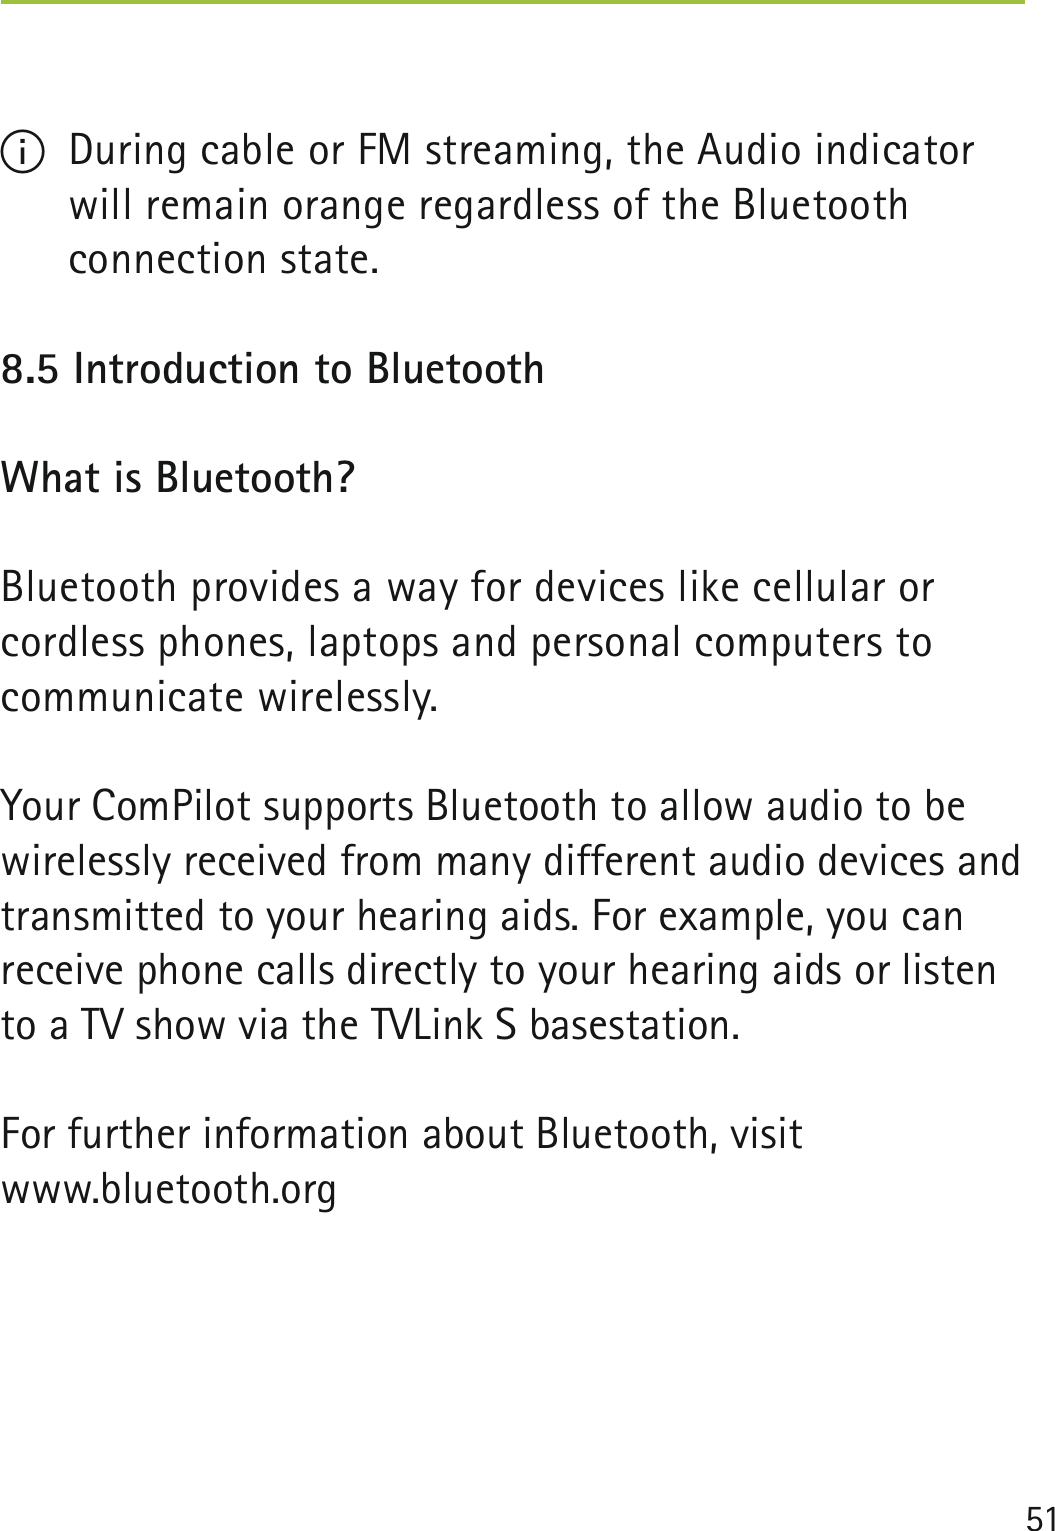 51I  During cable or FM streaming, the Audio indicator will remain orange regardless of the Bluetooth  connection state.8.5 Introduction to Bluetooth What is Bluetooth?Bluetooth provides a way for devices like cellular or  cordless phones, laptops and personal computers to  communicate wirelessly.Your ComPilot supports Bluetooth to allow audio to be wirelessly received from many different audio devices and transmitted to your hearing aids. For example, you can receive phone calls directly to your hearing aids or listen to a TV show via the TVLink S basestation.For further information about Bluetooth, visit www.bluetooth.org  